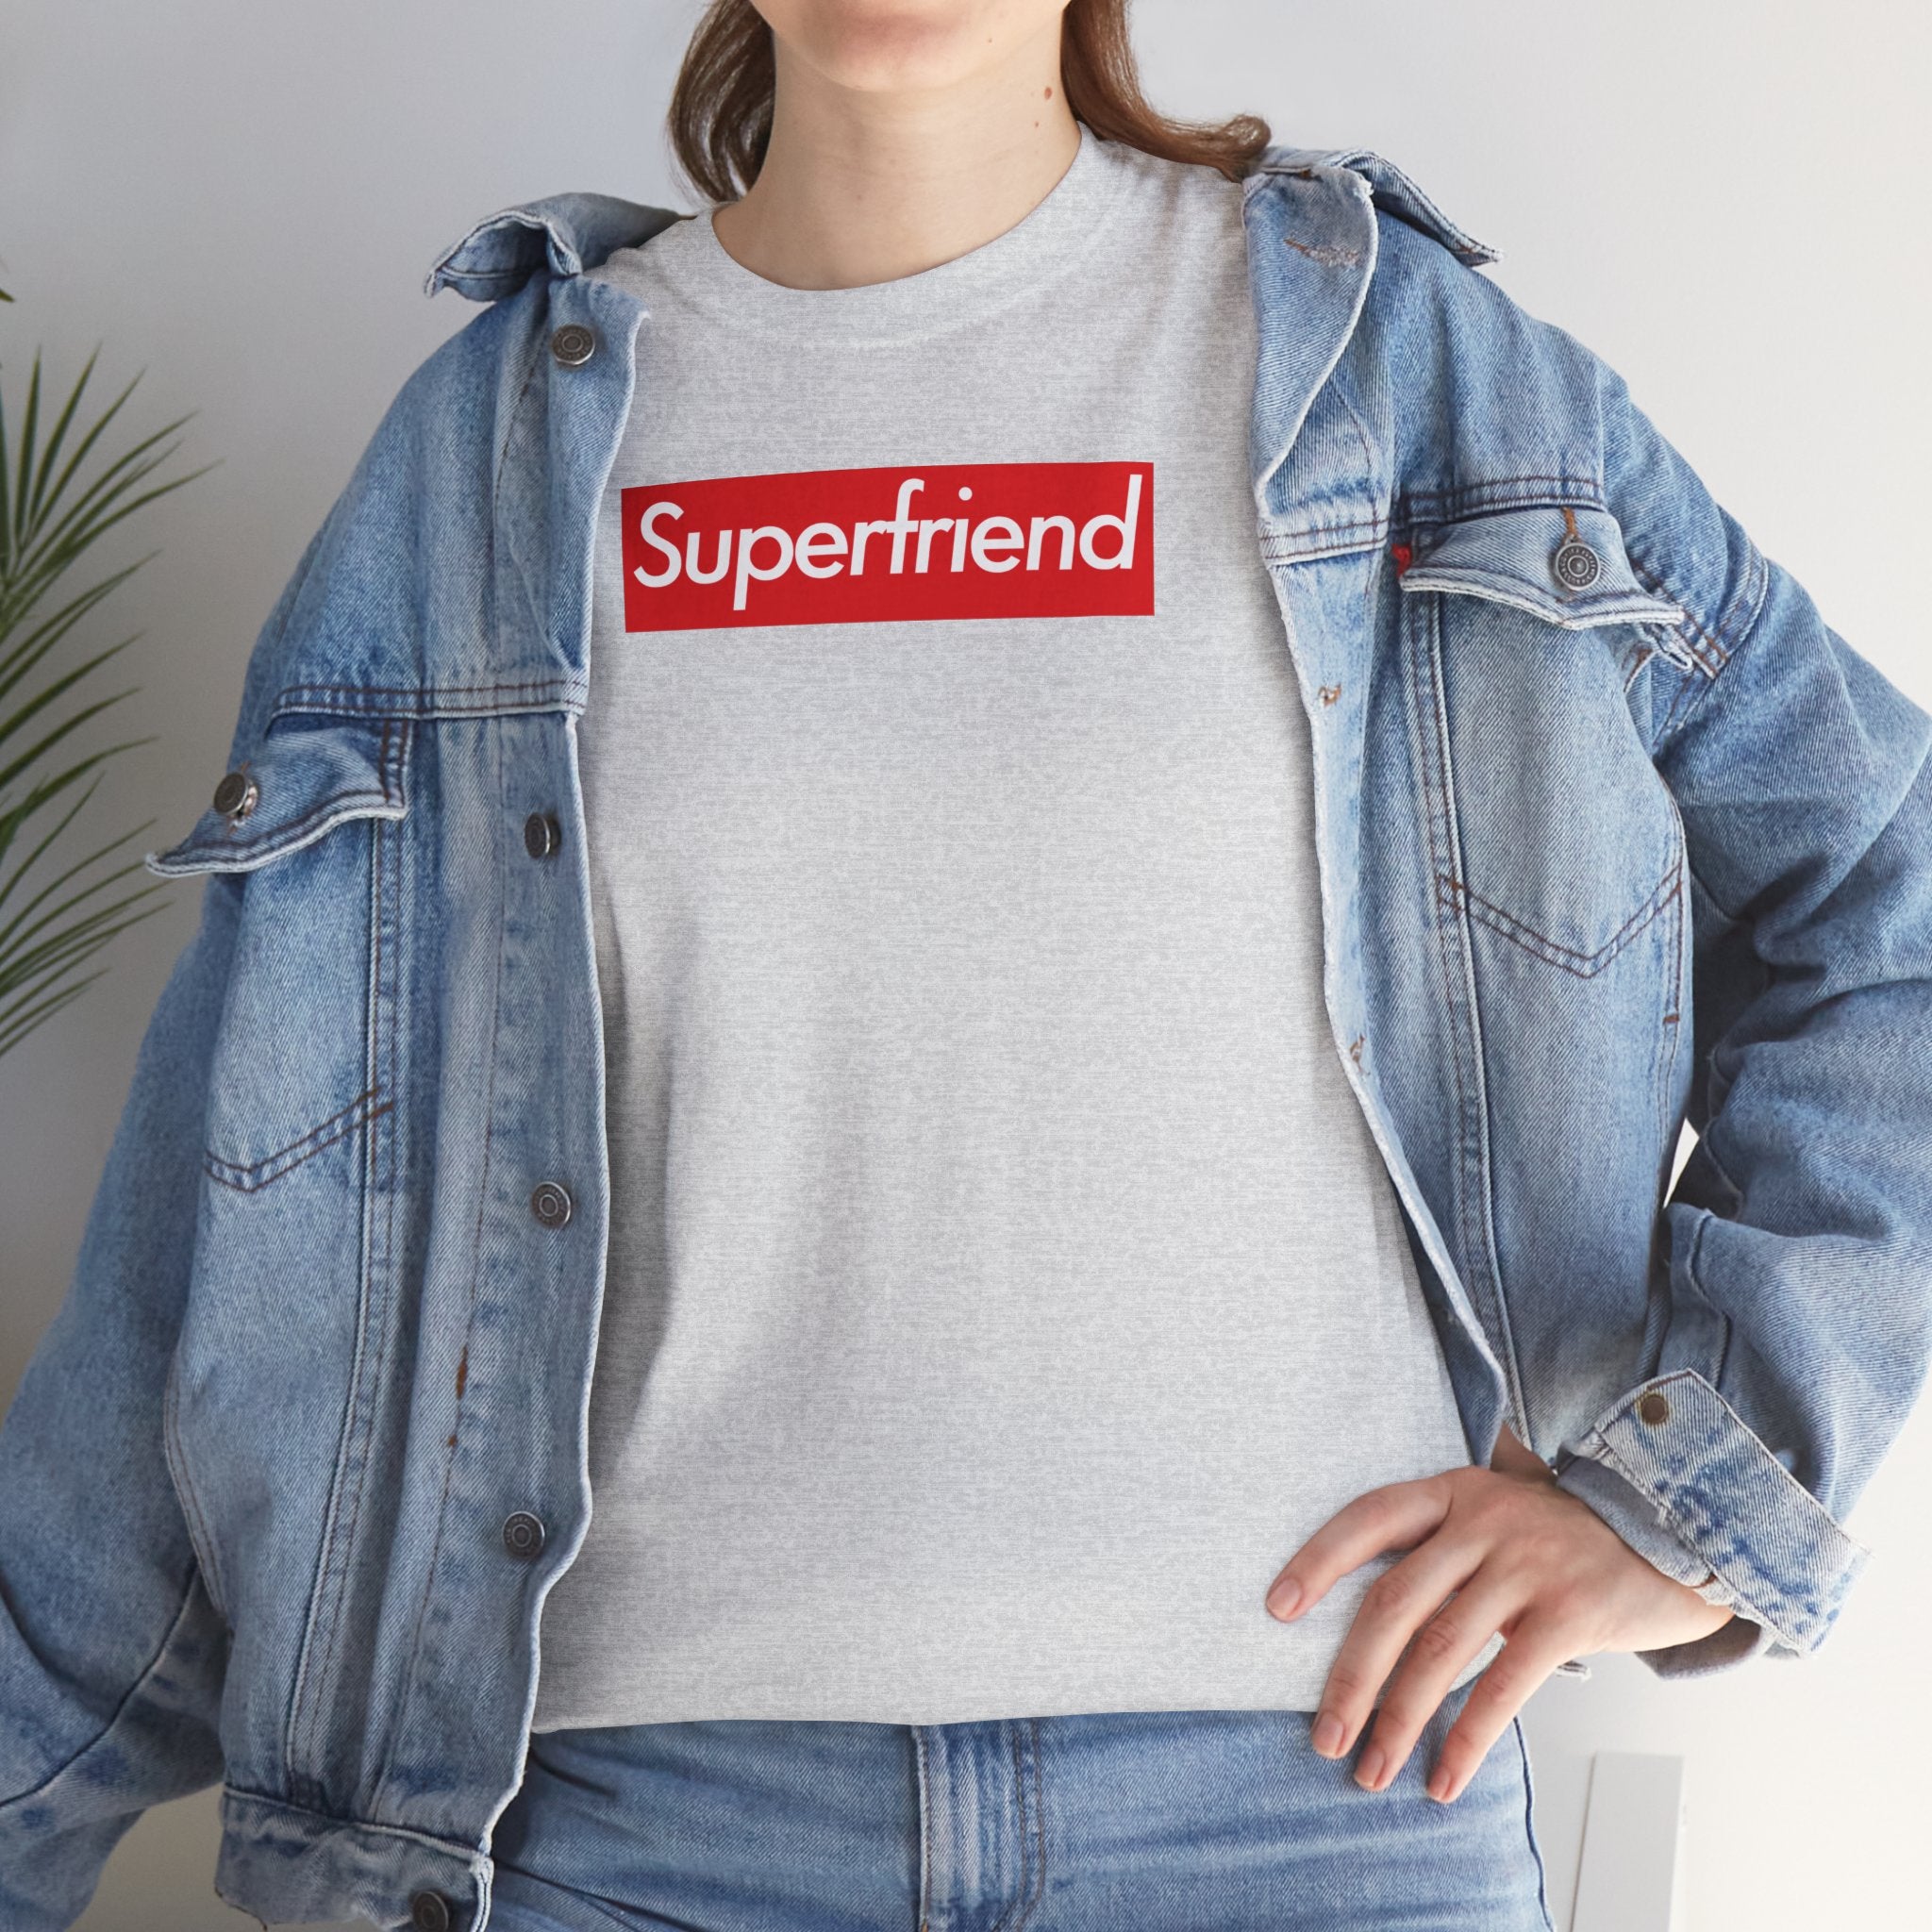 Superfriend Unisex Heavy Cotton Tee Shirt T-shirt super Inspired Funny Friend Friends Appreciation Gift For Colleague Thank You Thankful Birthday Christmas